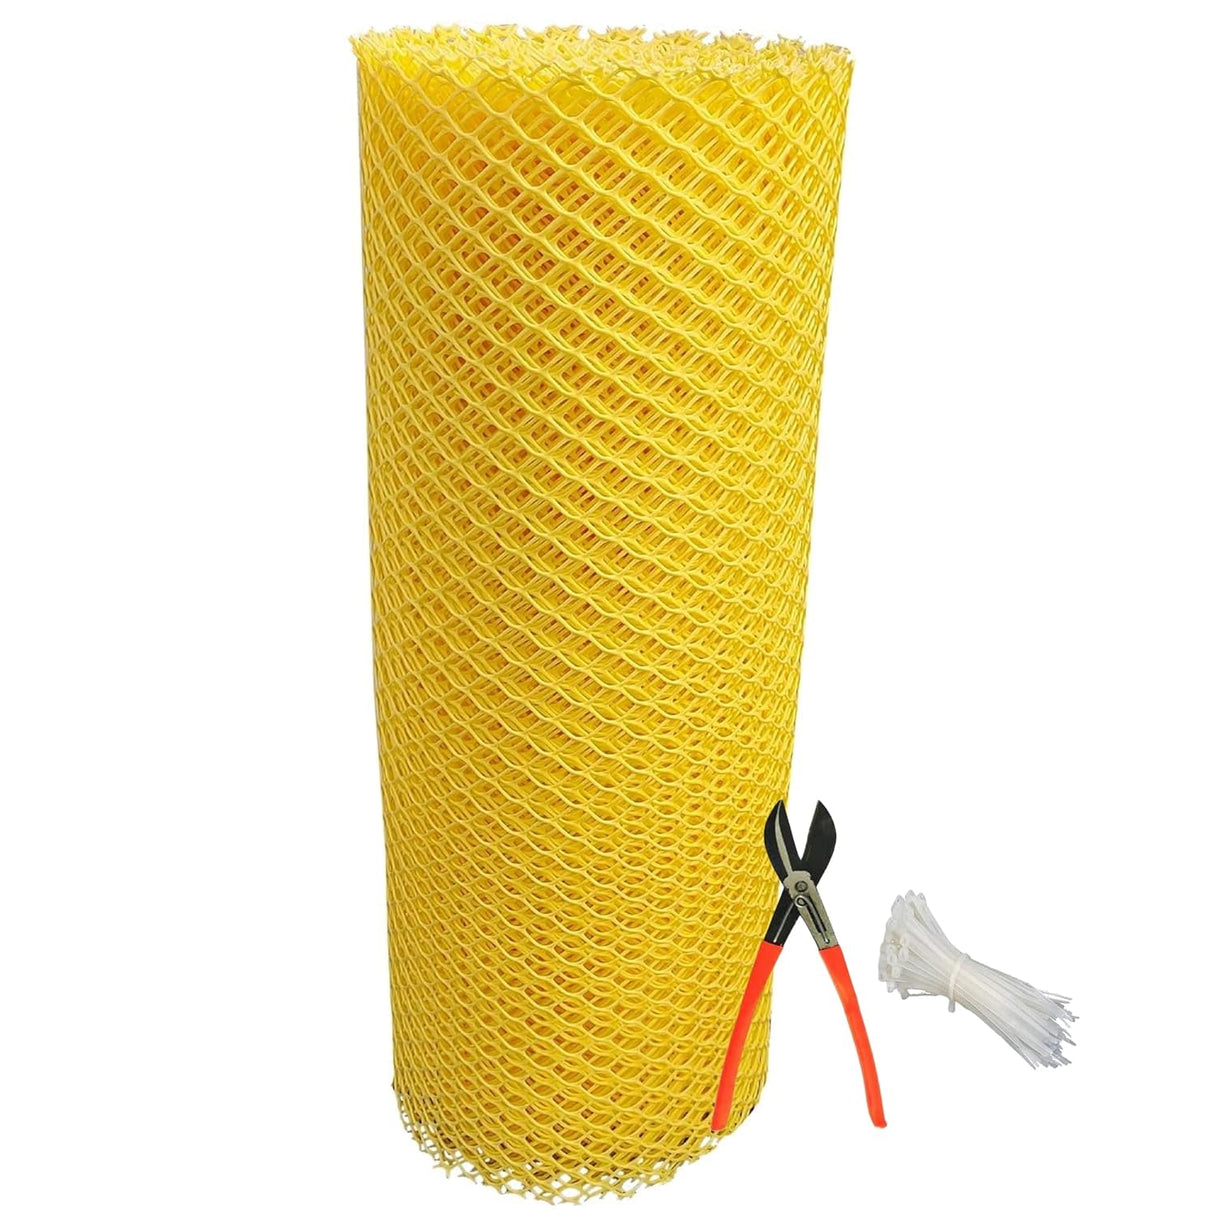 Singhal Tree Guard Net, Garden Fencing Net Virgin Plastic with 1 Cutter and 50 PVC Tags (Yellow, 4 ft x 5 ft)